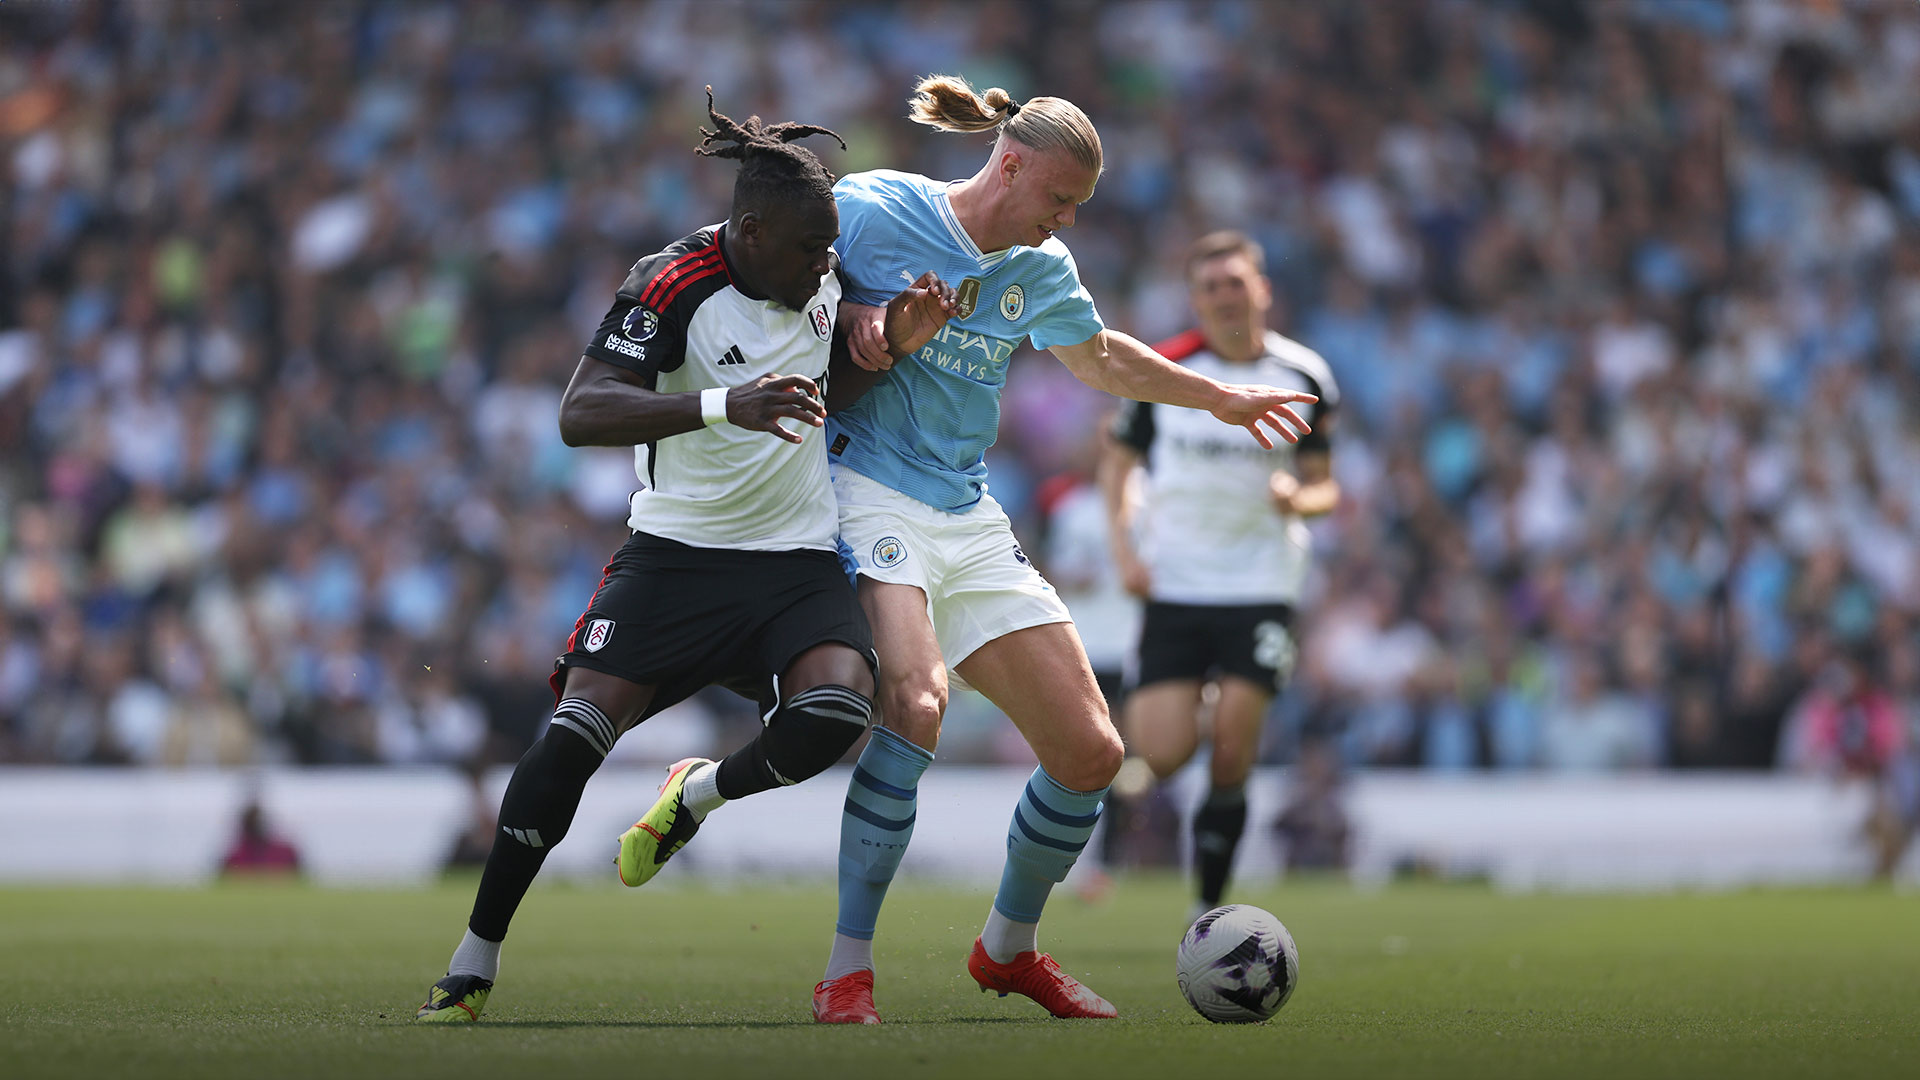 Replay: Fulham vs Manchester City